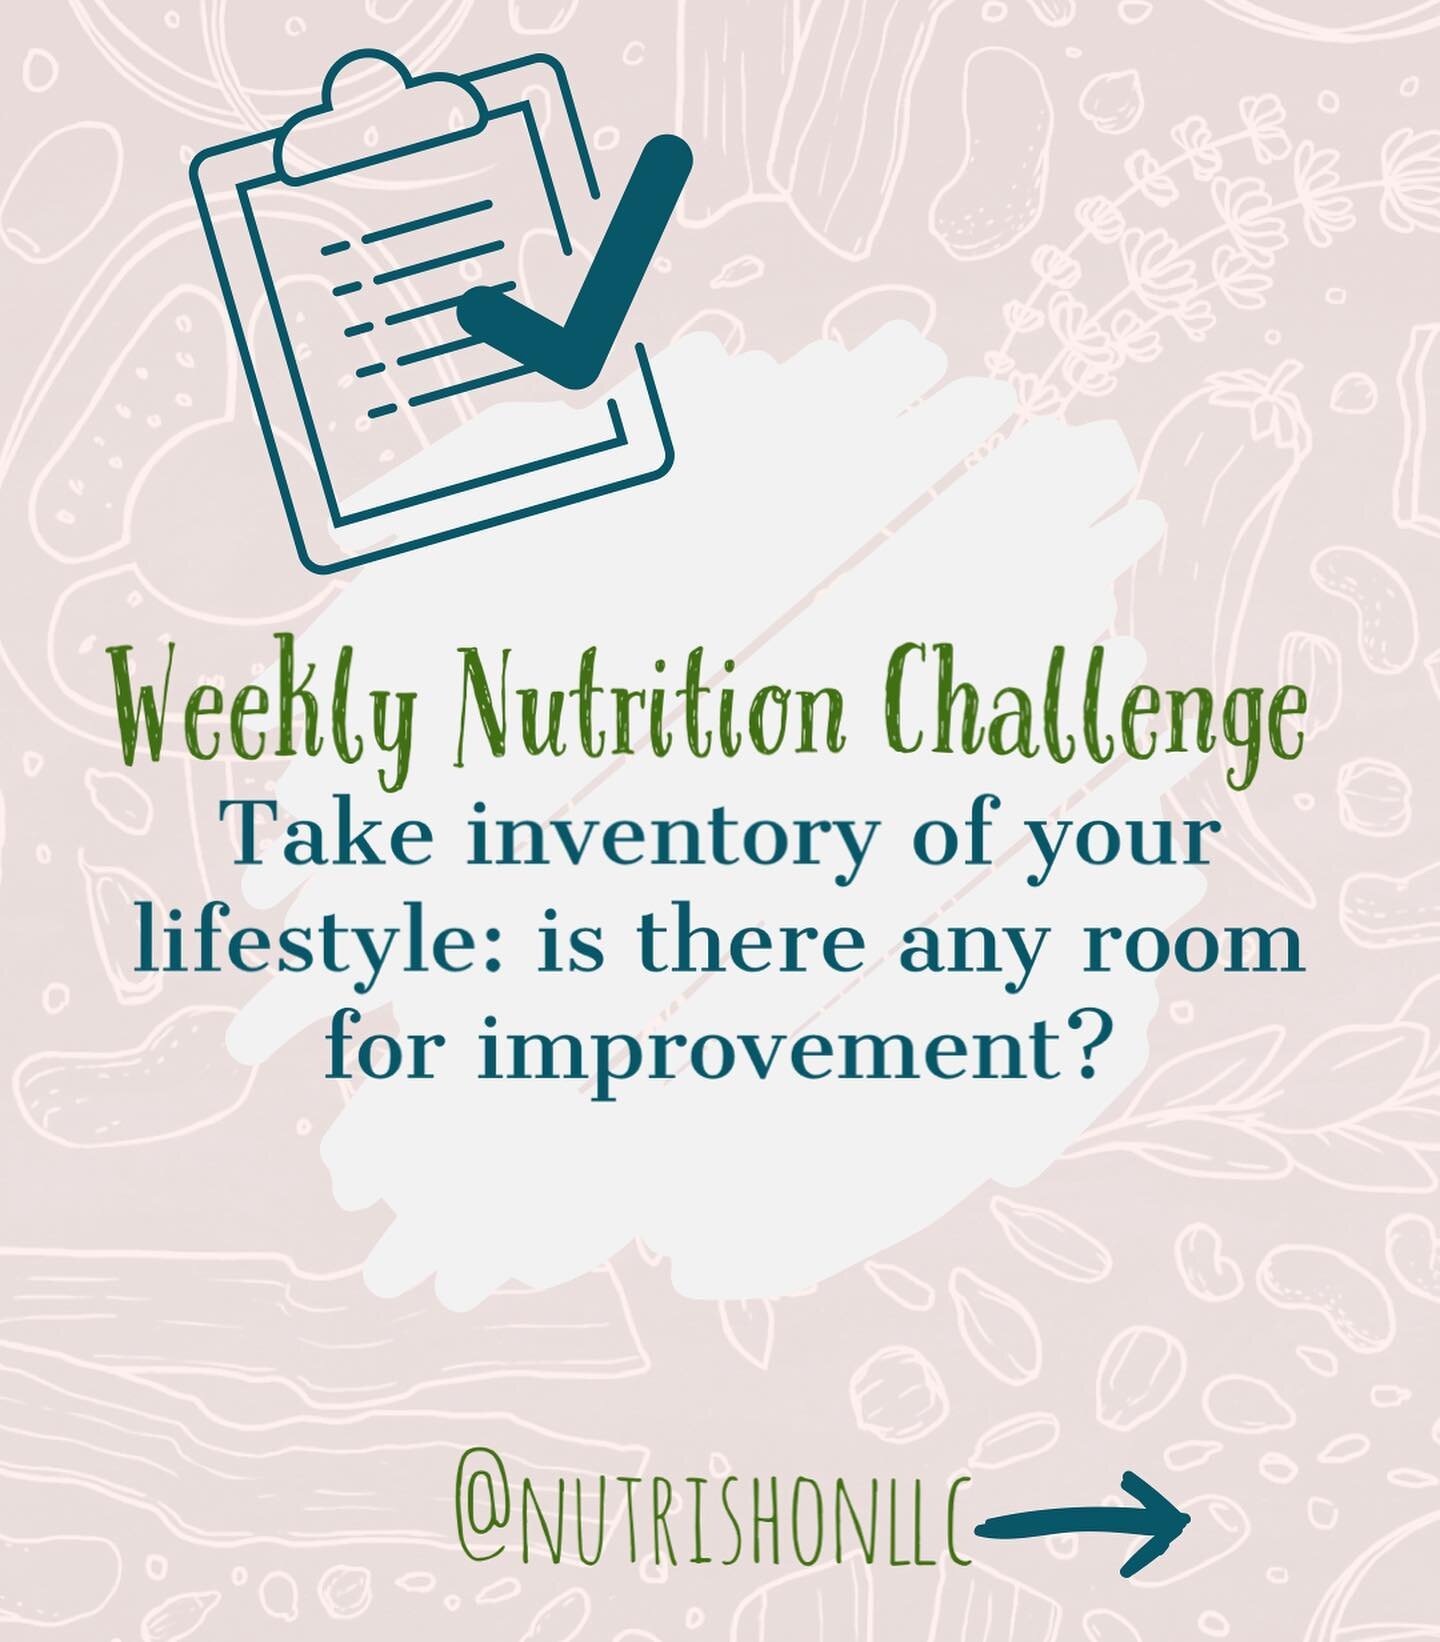 ❤️ this post to accept the challenge!

Today marks the start of a new month, which means a fresh start and the perfect opportunity to self-reflect and define any areas in need of improvement. 

Maybe you want to cut out added sugars? Maybe you want t